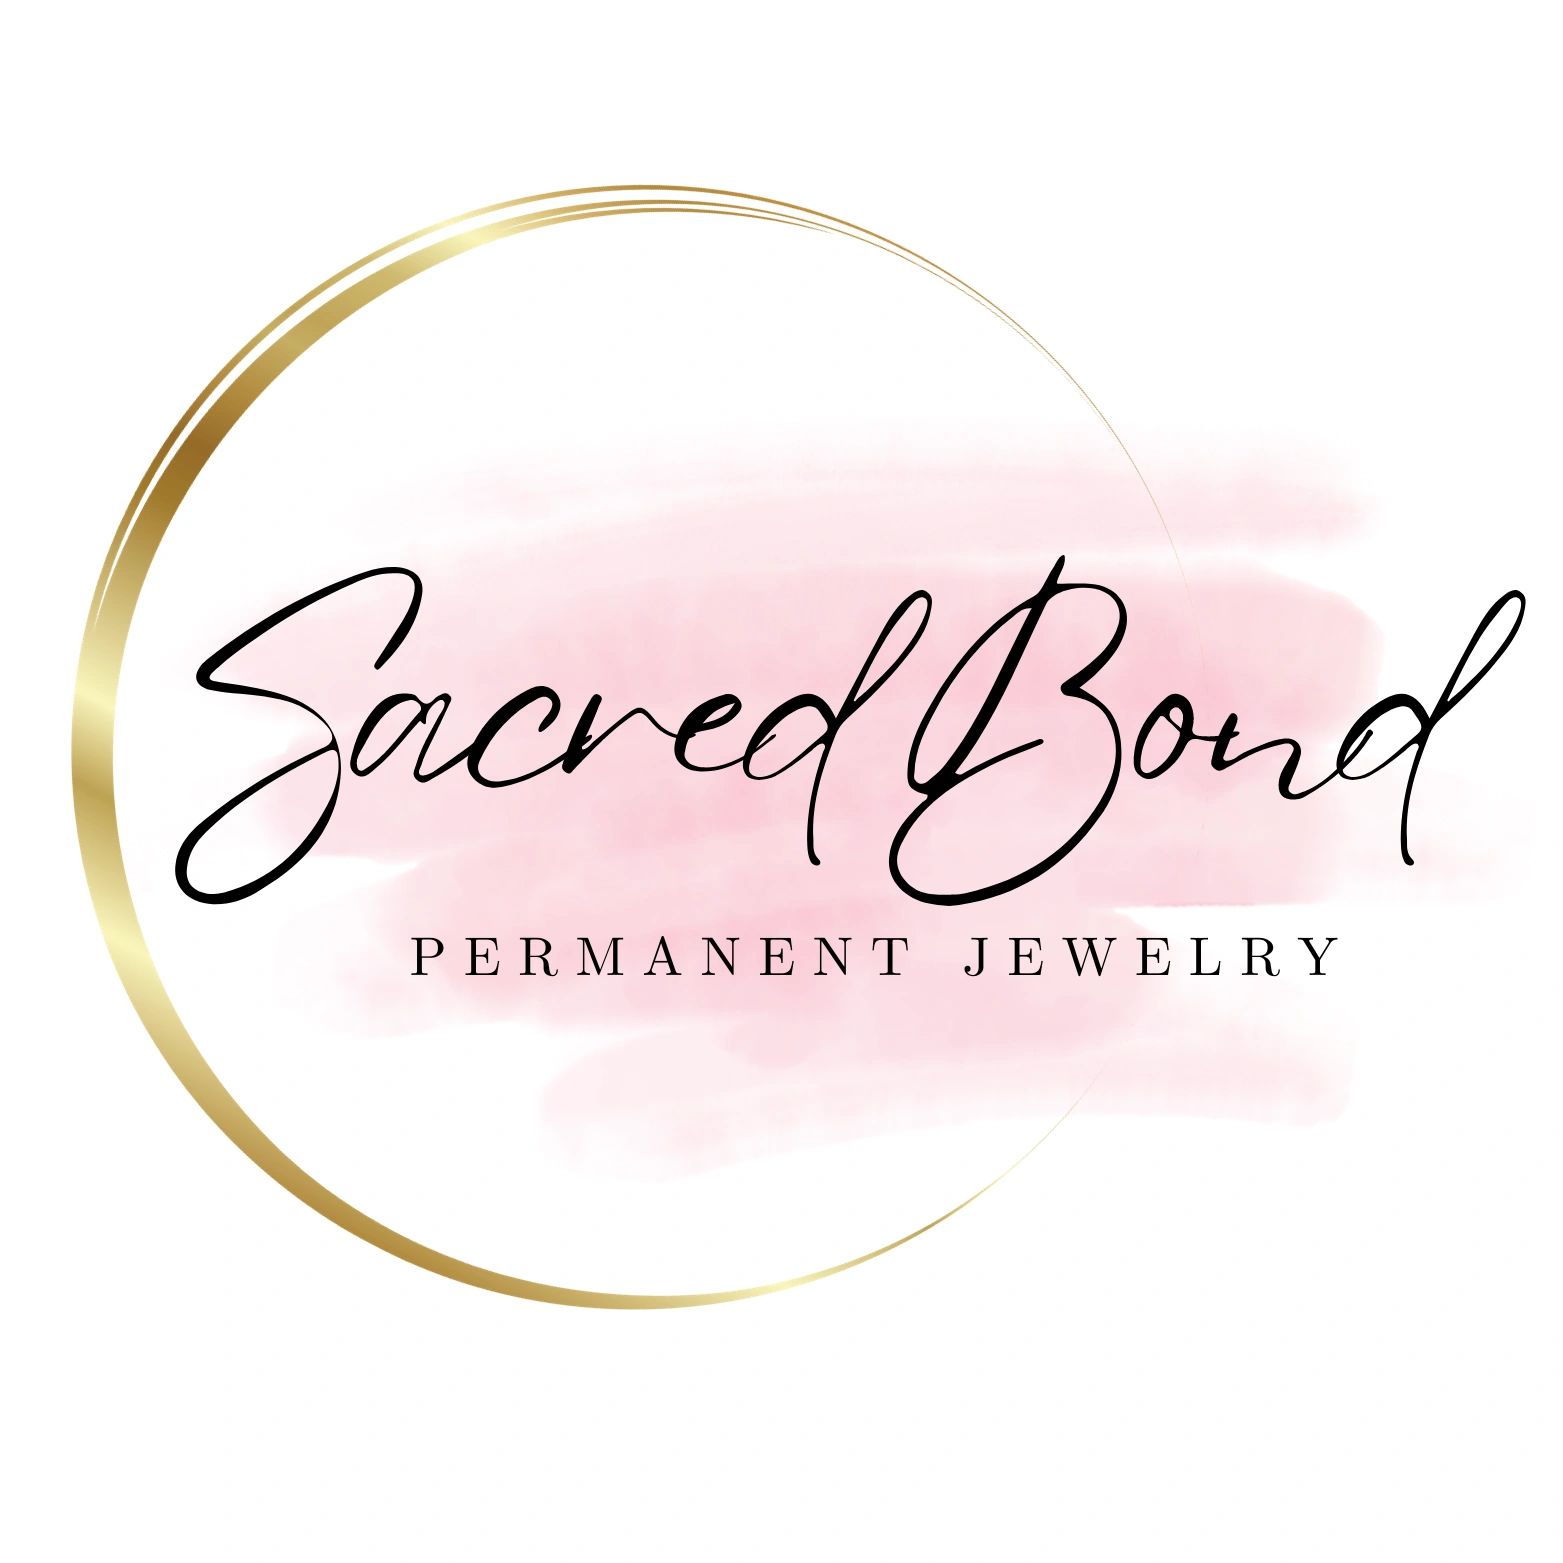 Sacred Bond Jewelry offers Permanent Jewelry services at Superficial Modspa in Weymouth, MA